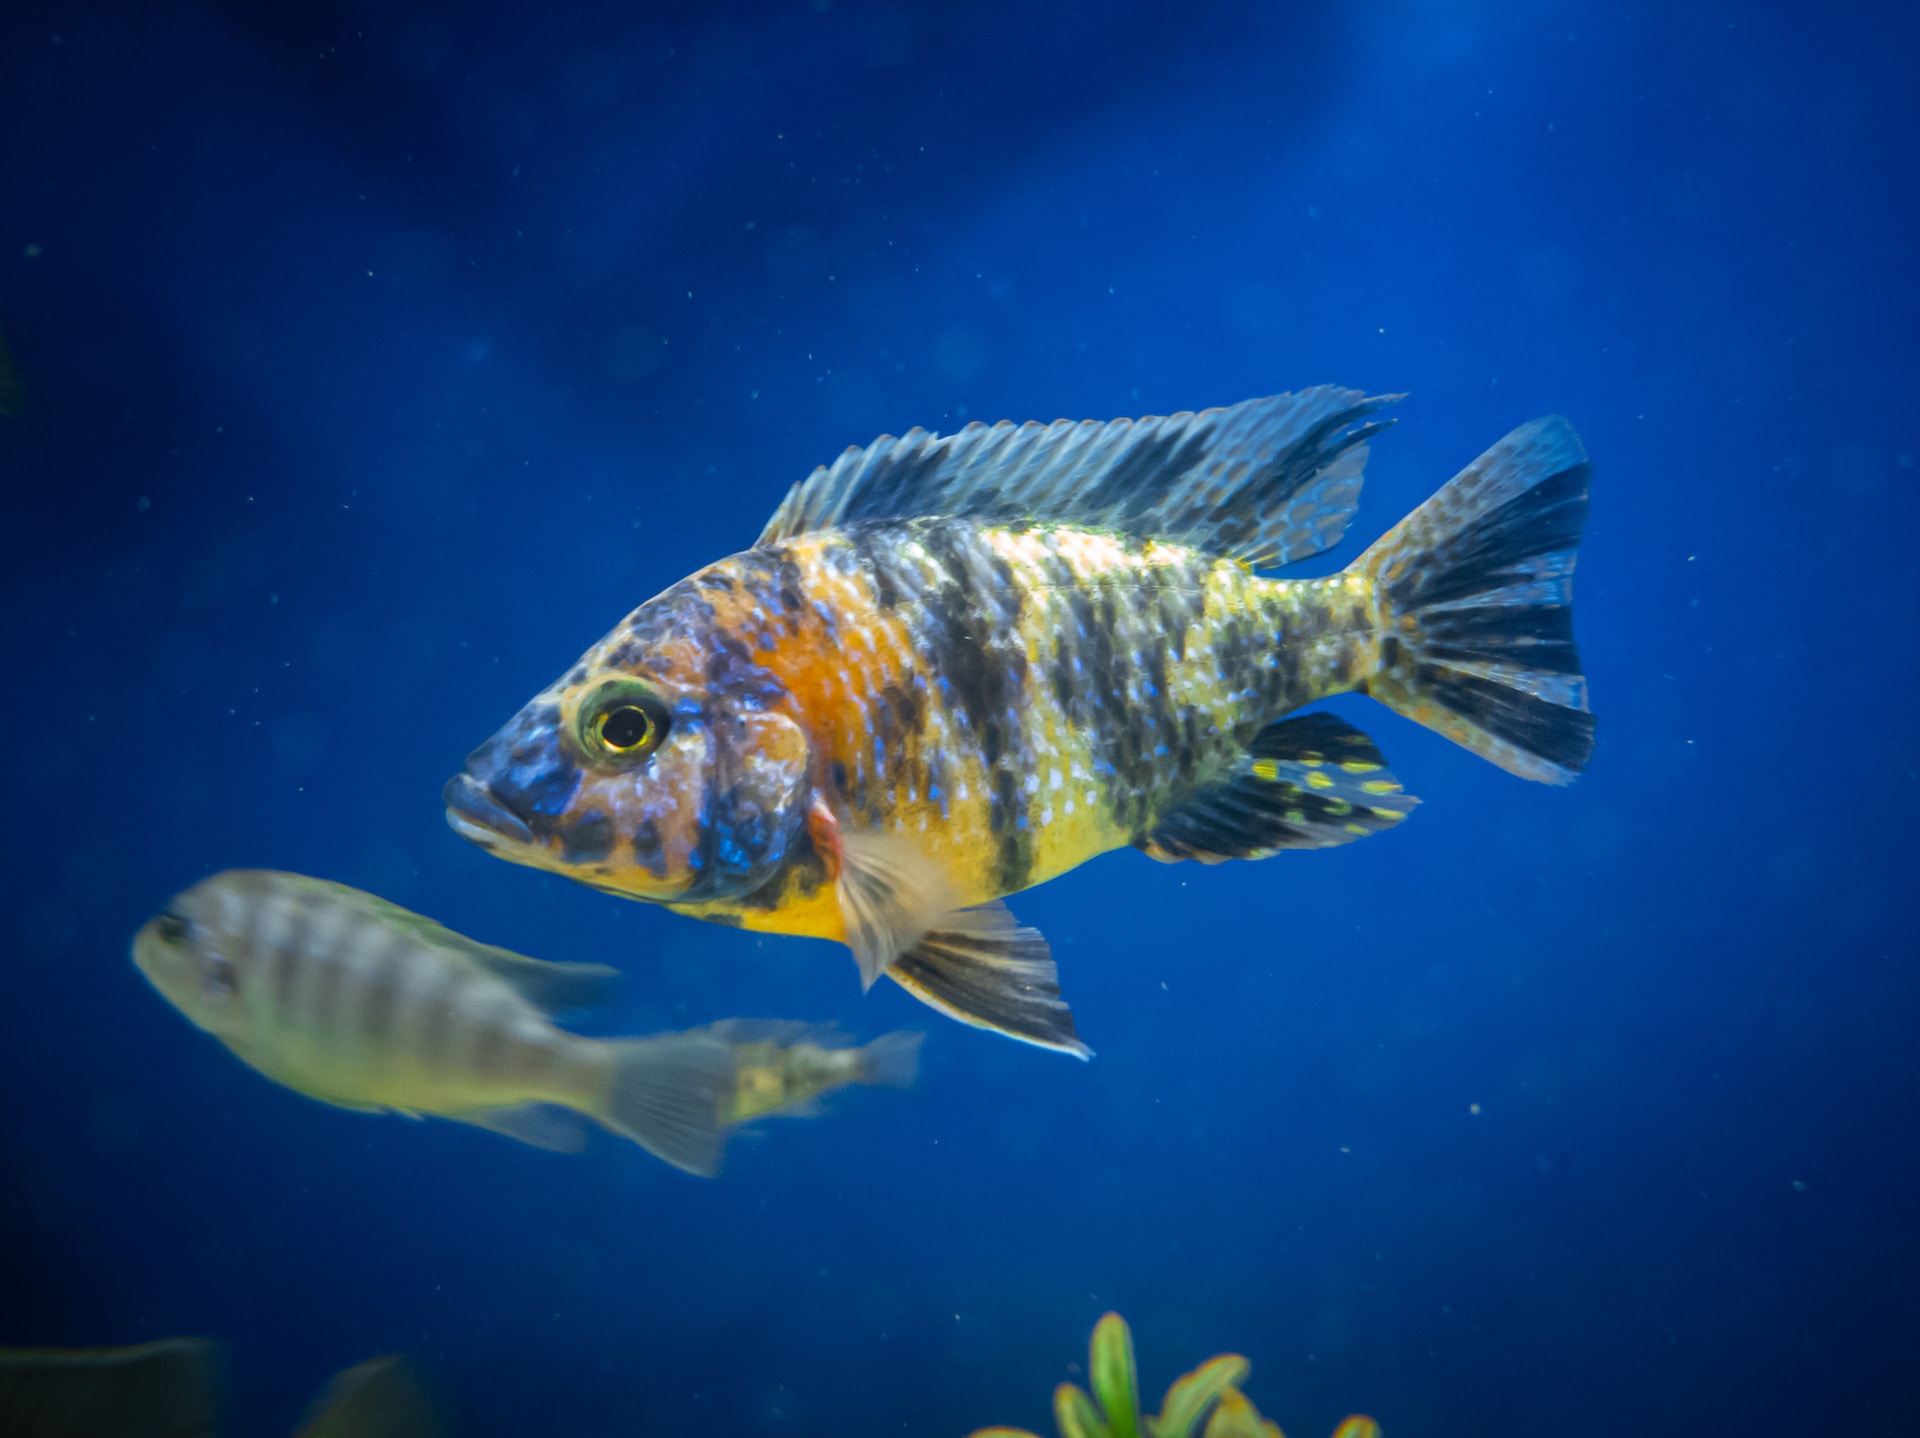 OB Peacock cichlid in African cichlid tank